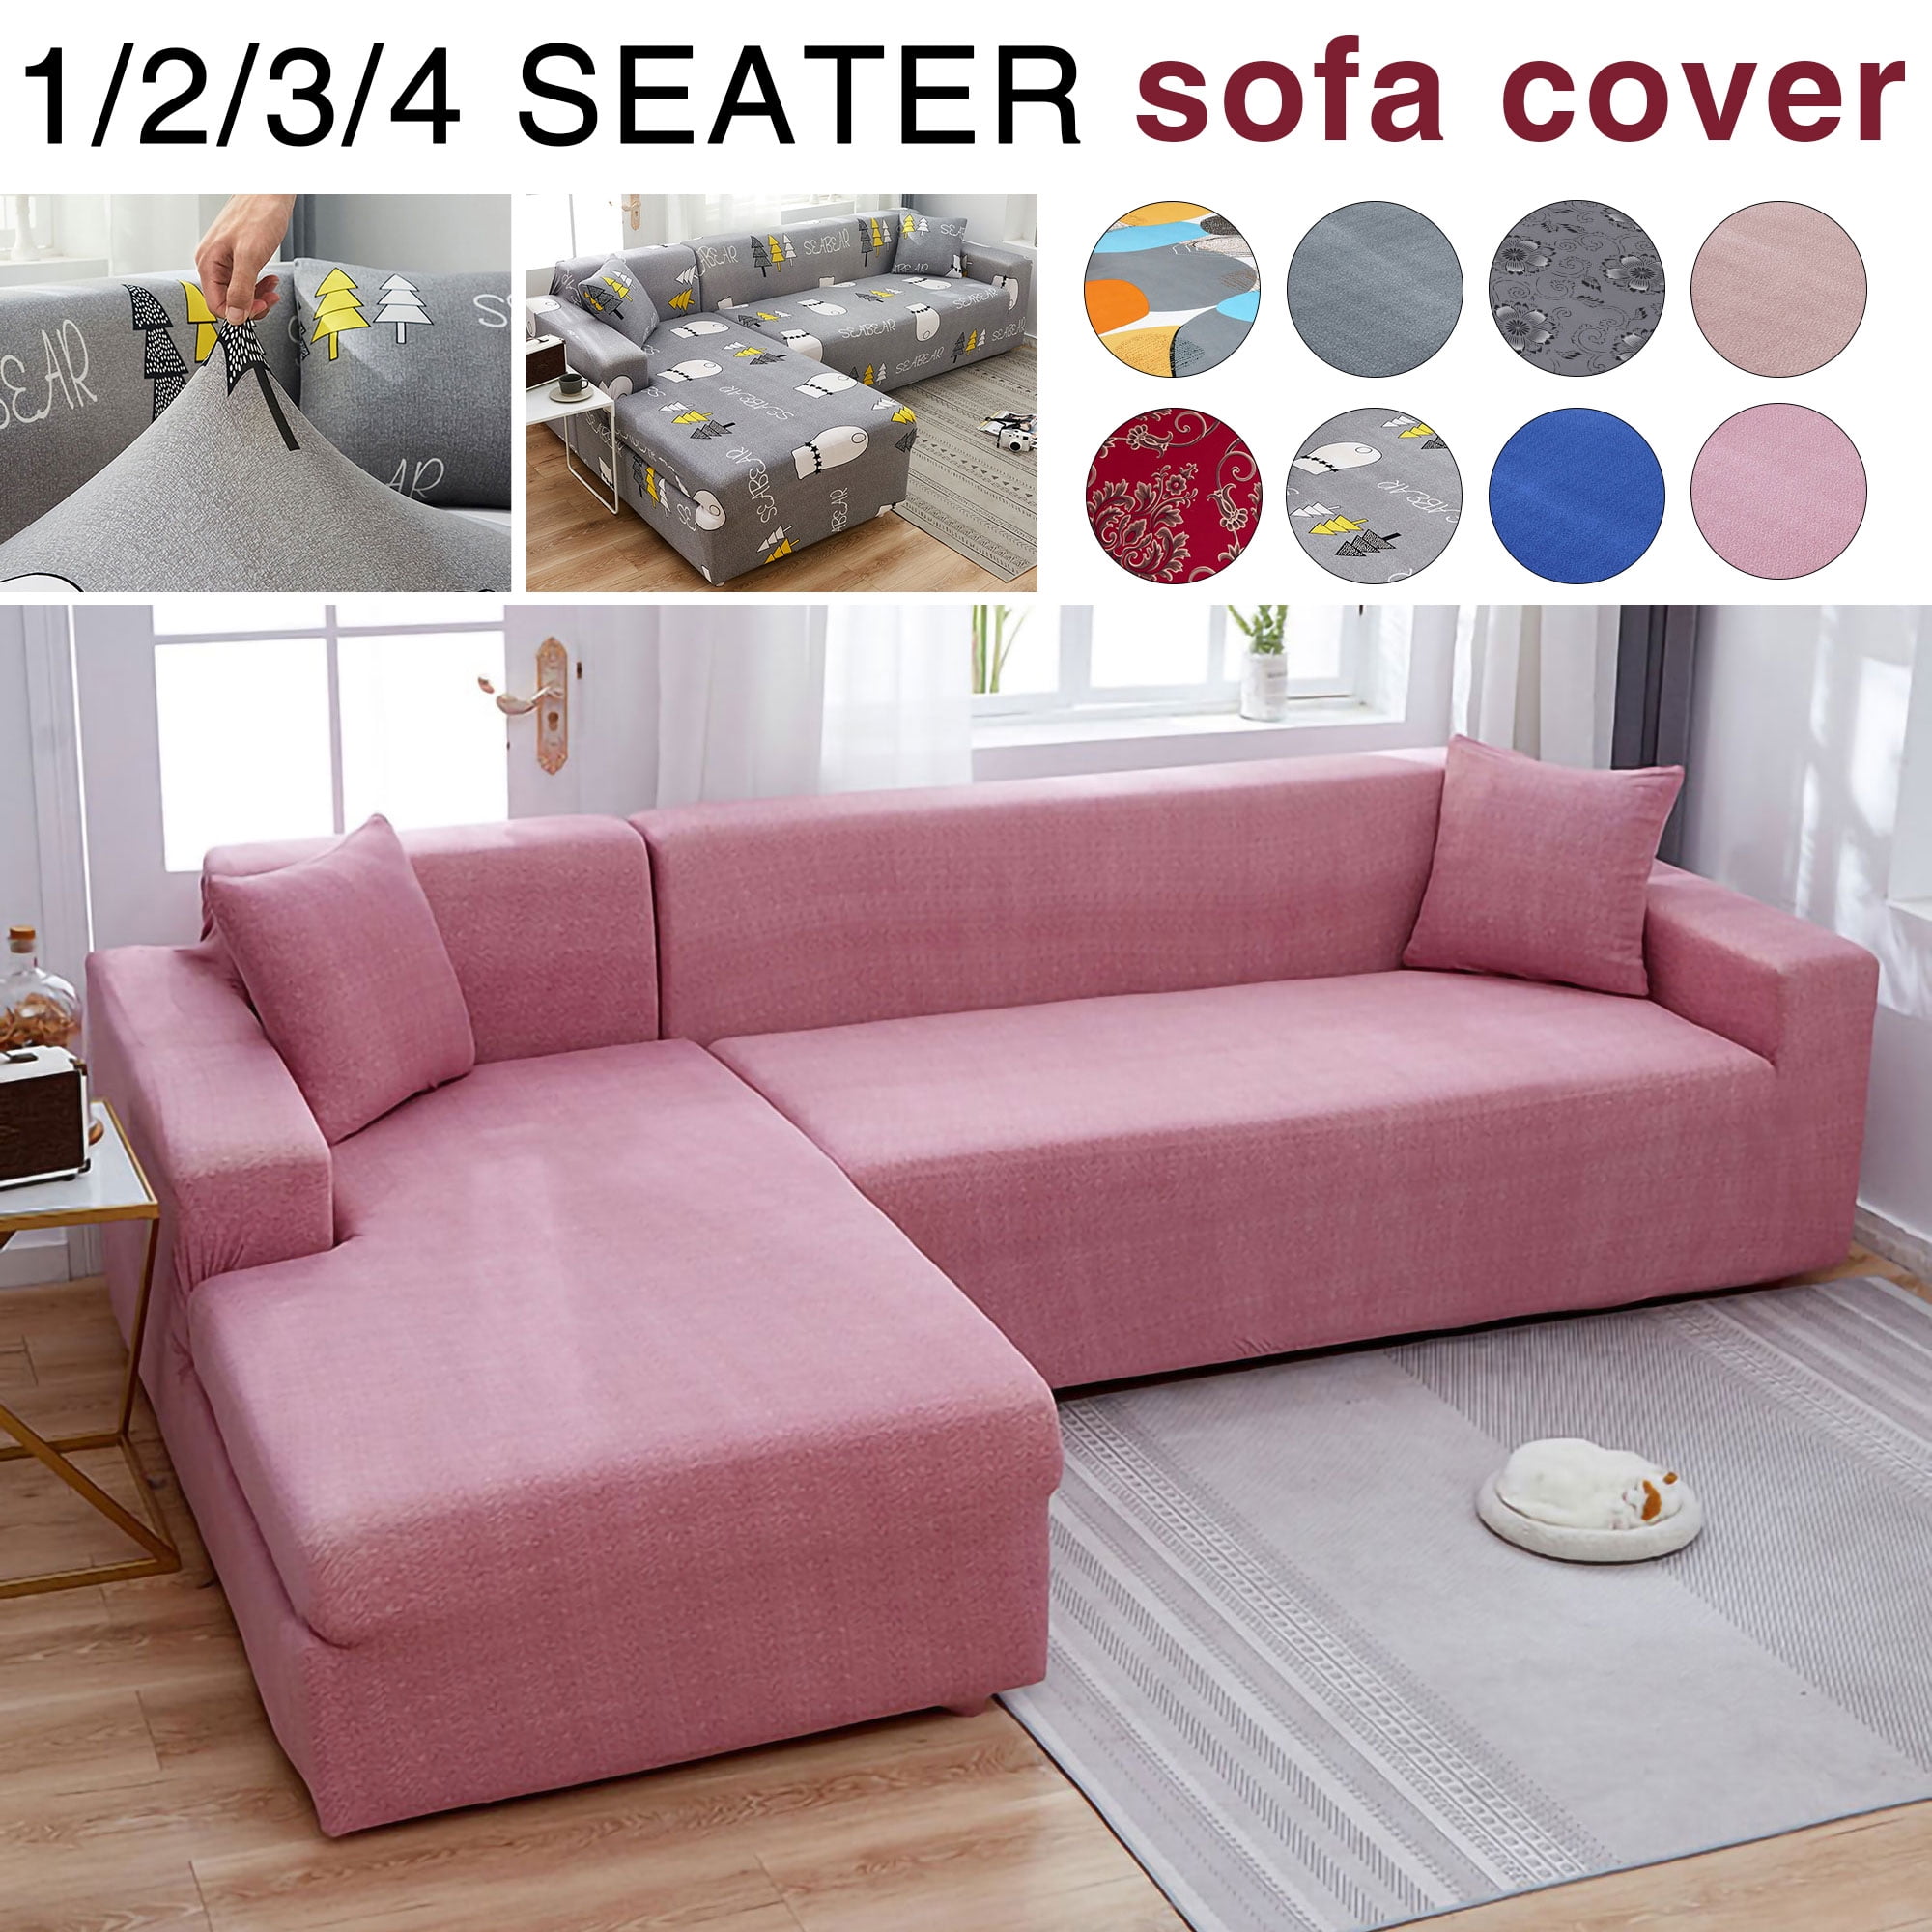 Sofa Covers Washable Stretch Fabric Sectional Couch Cover Slipcover 1-4 Seater 